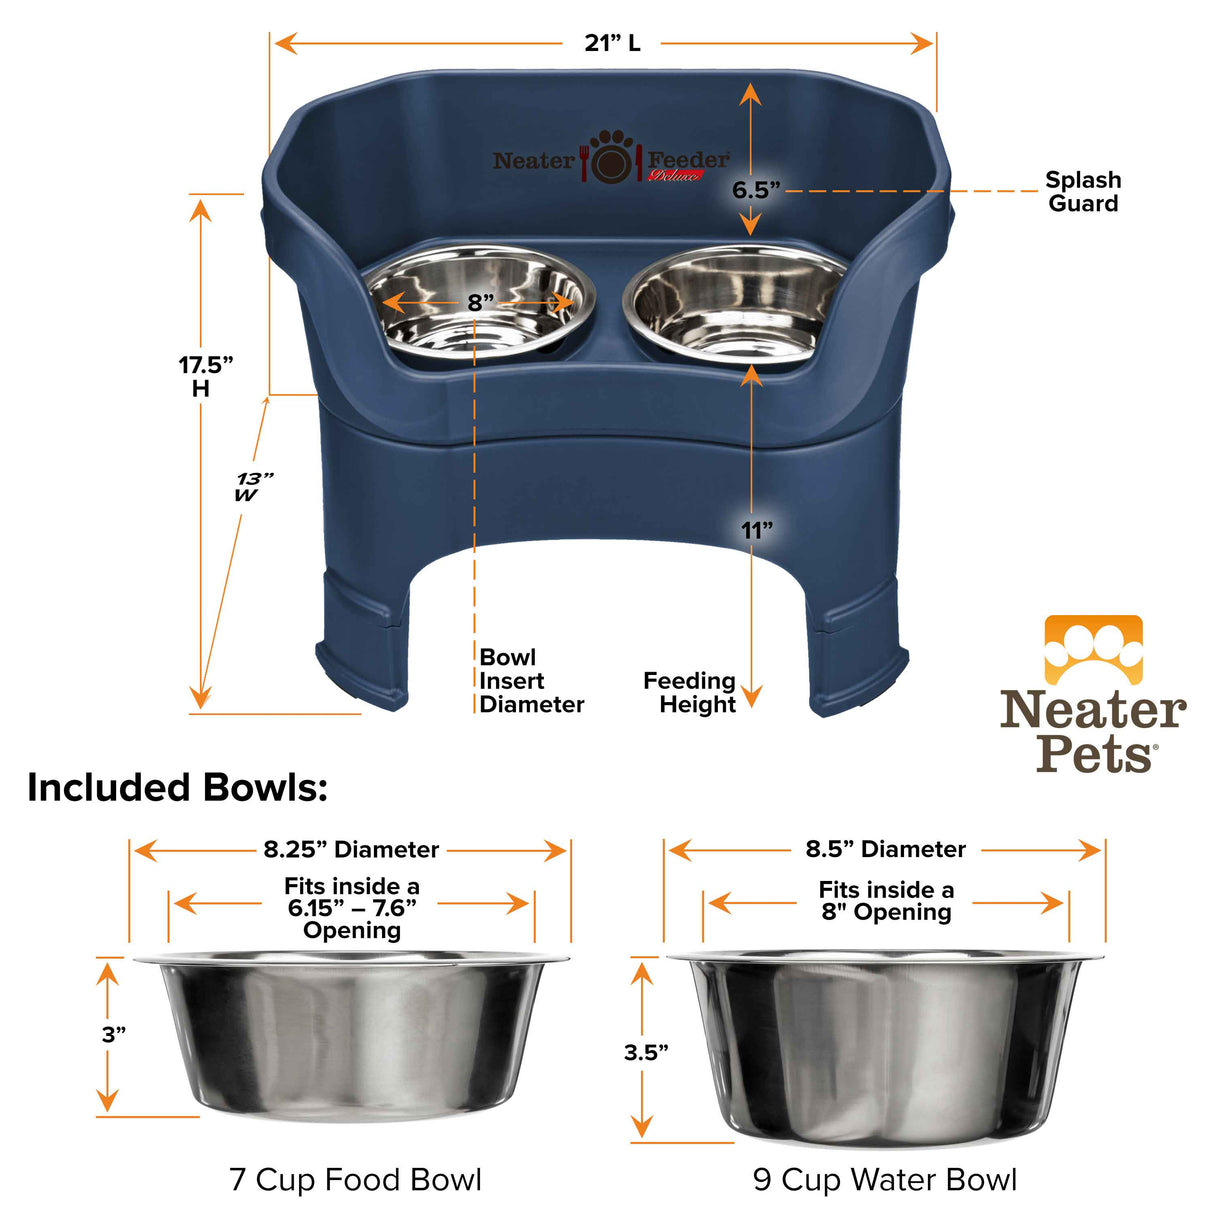 Large dog feeder and bowl dimensions